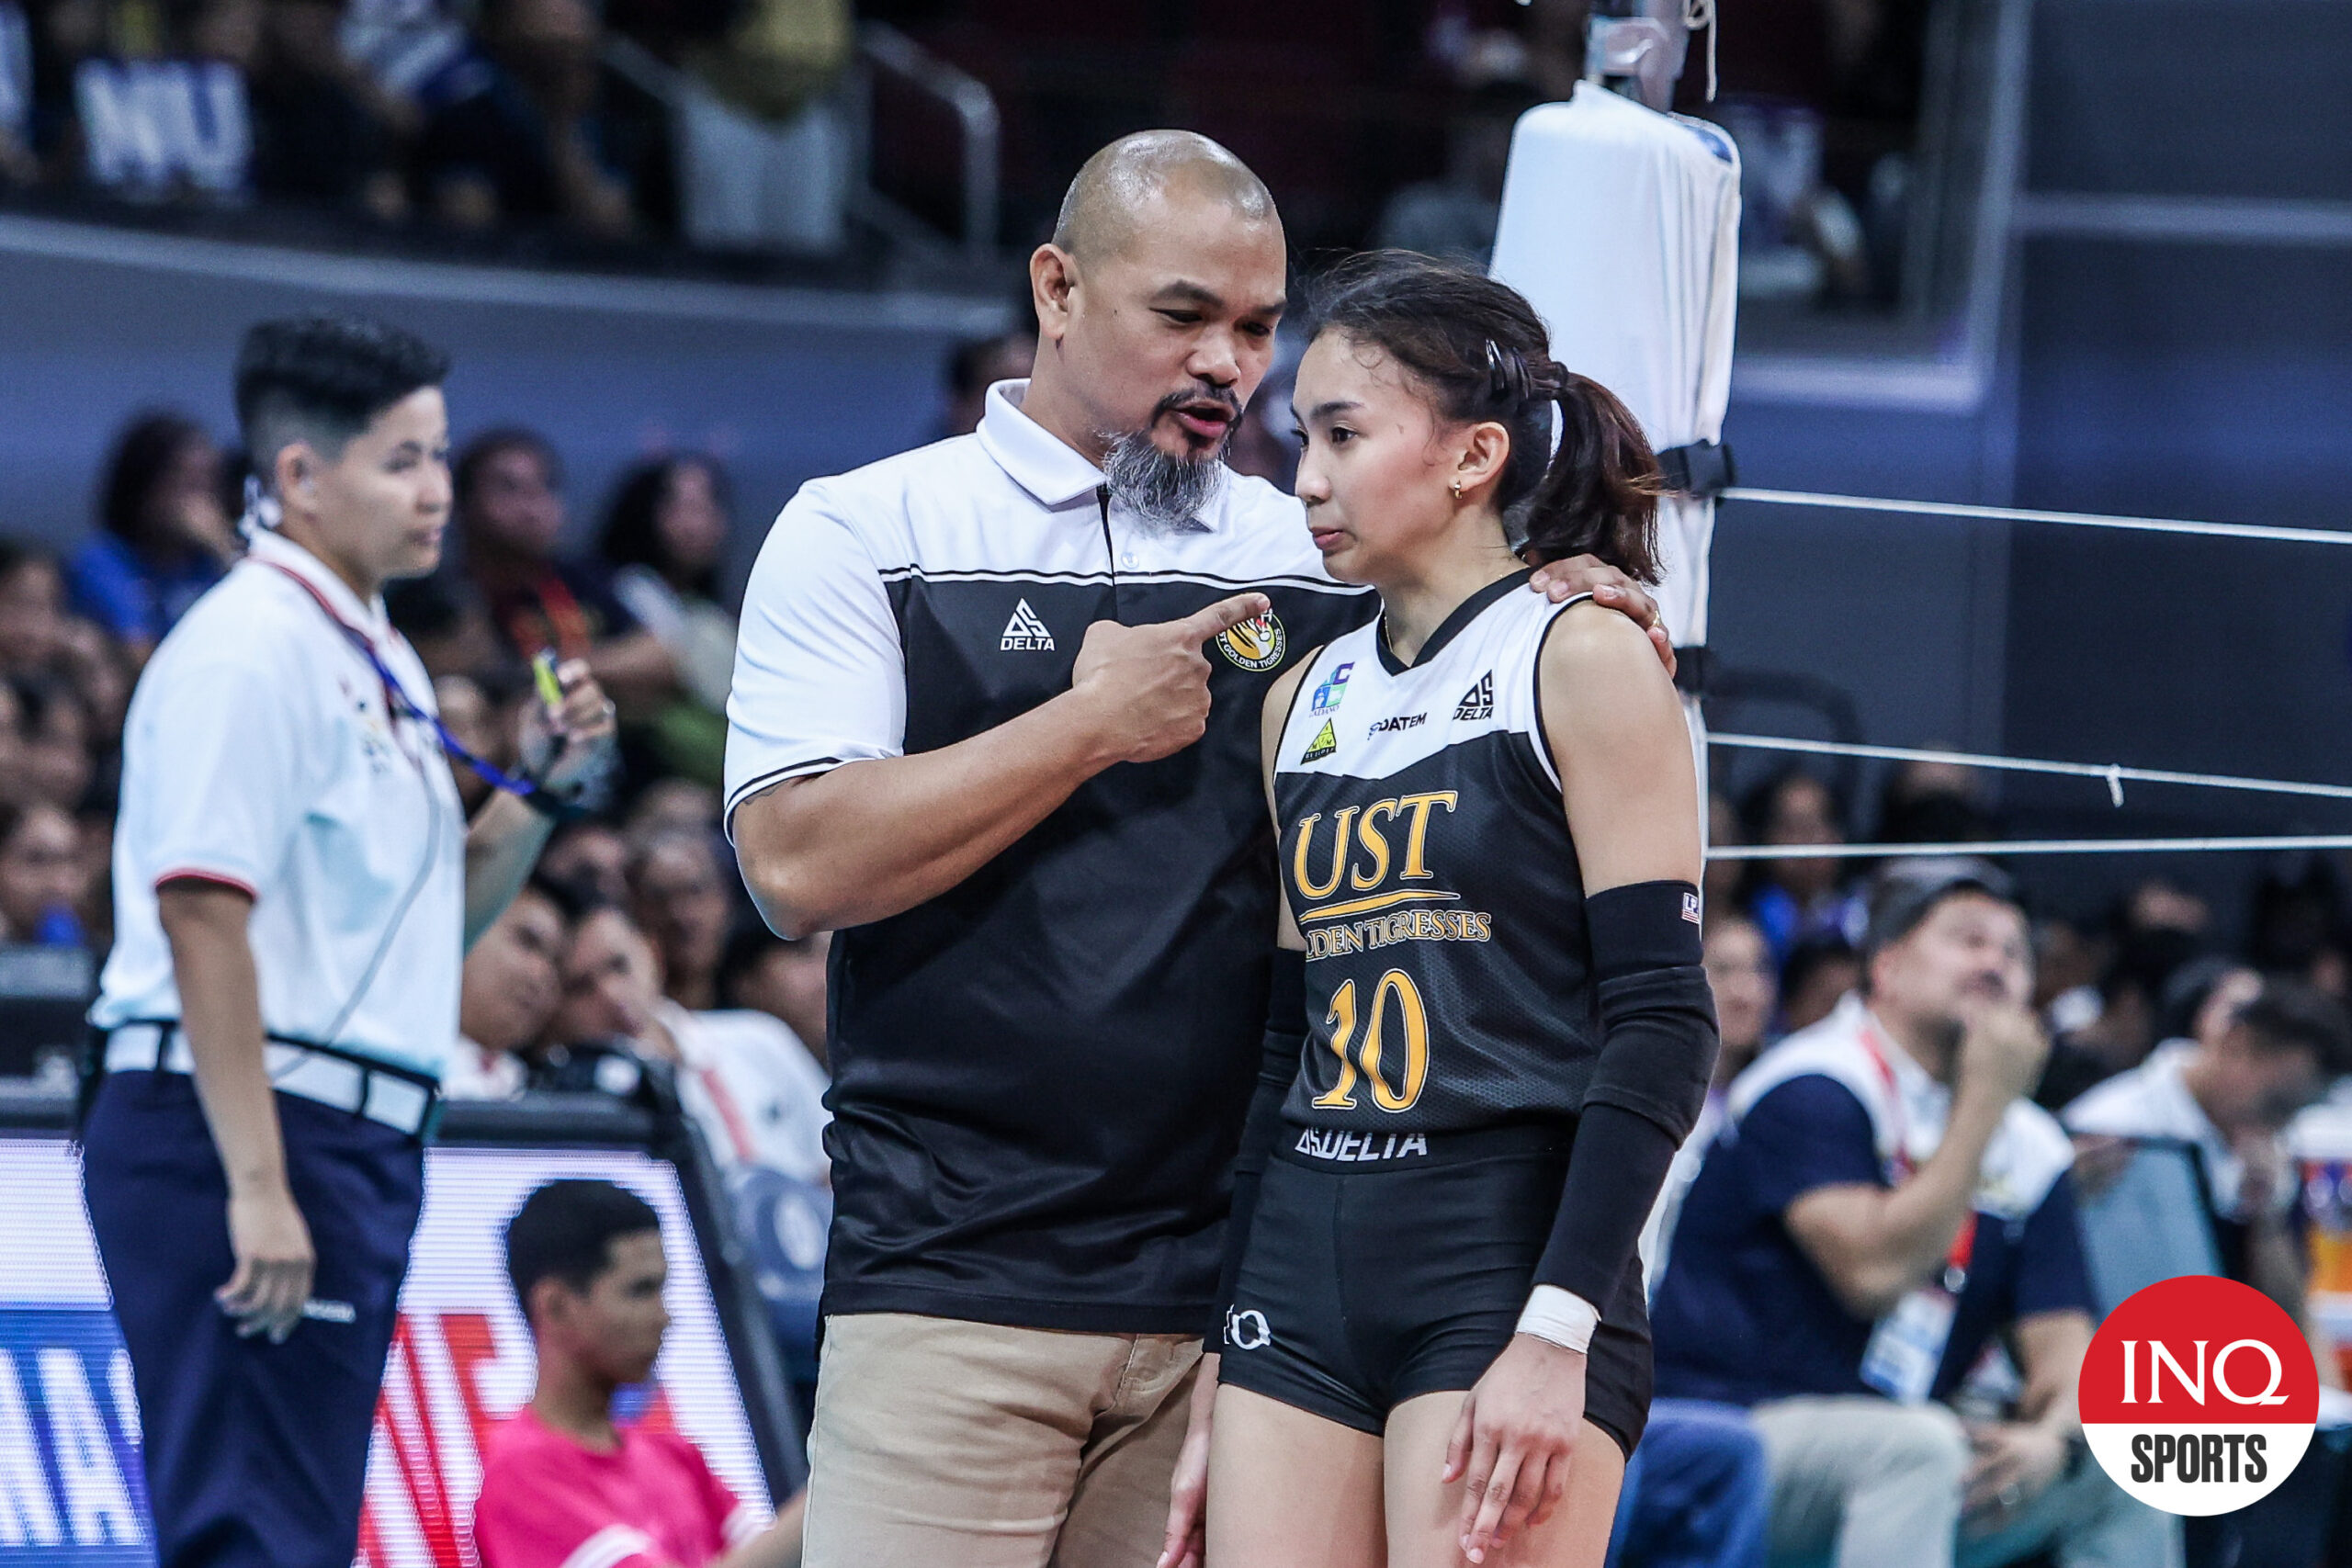 UST Tigresses' Xyza Gula with coach KungFu Reyes during the UAAP Season 86 women's Finals game against NU Bulldogs